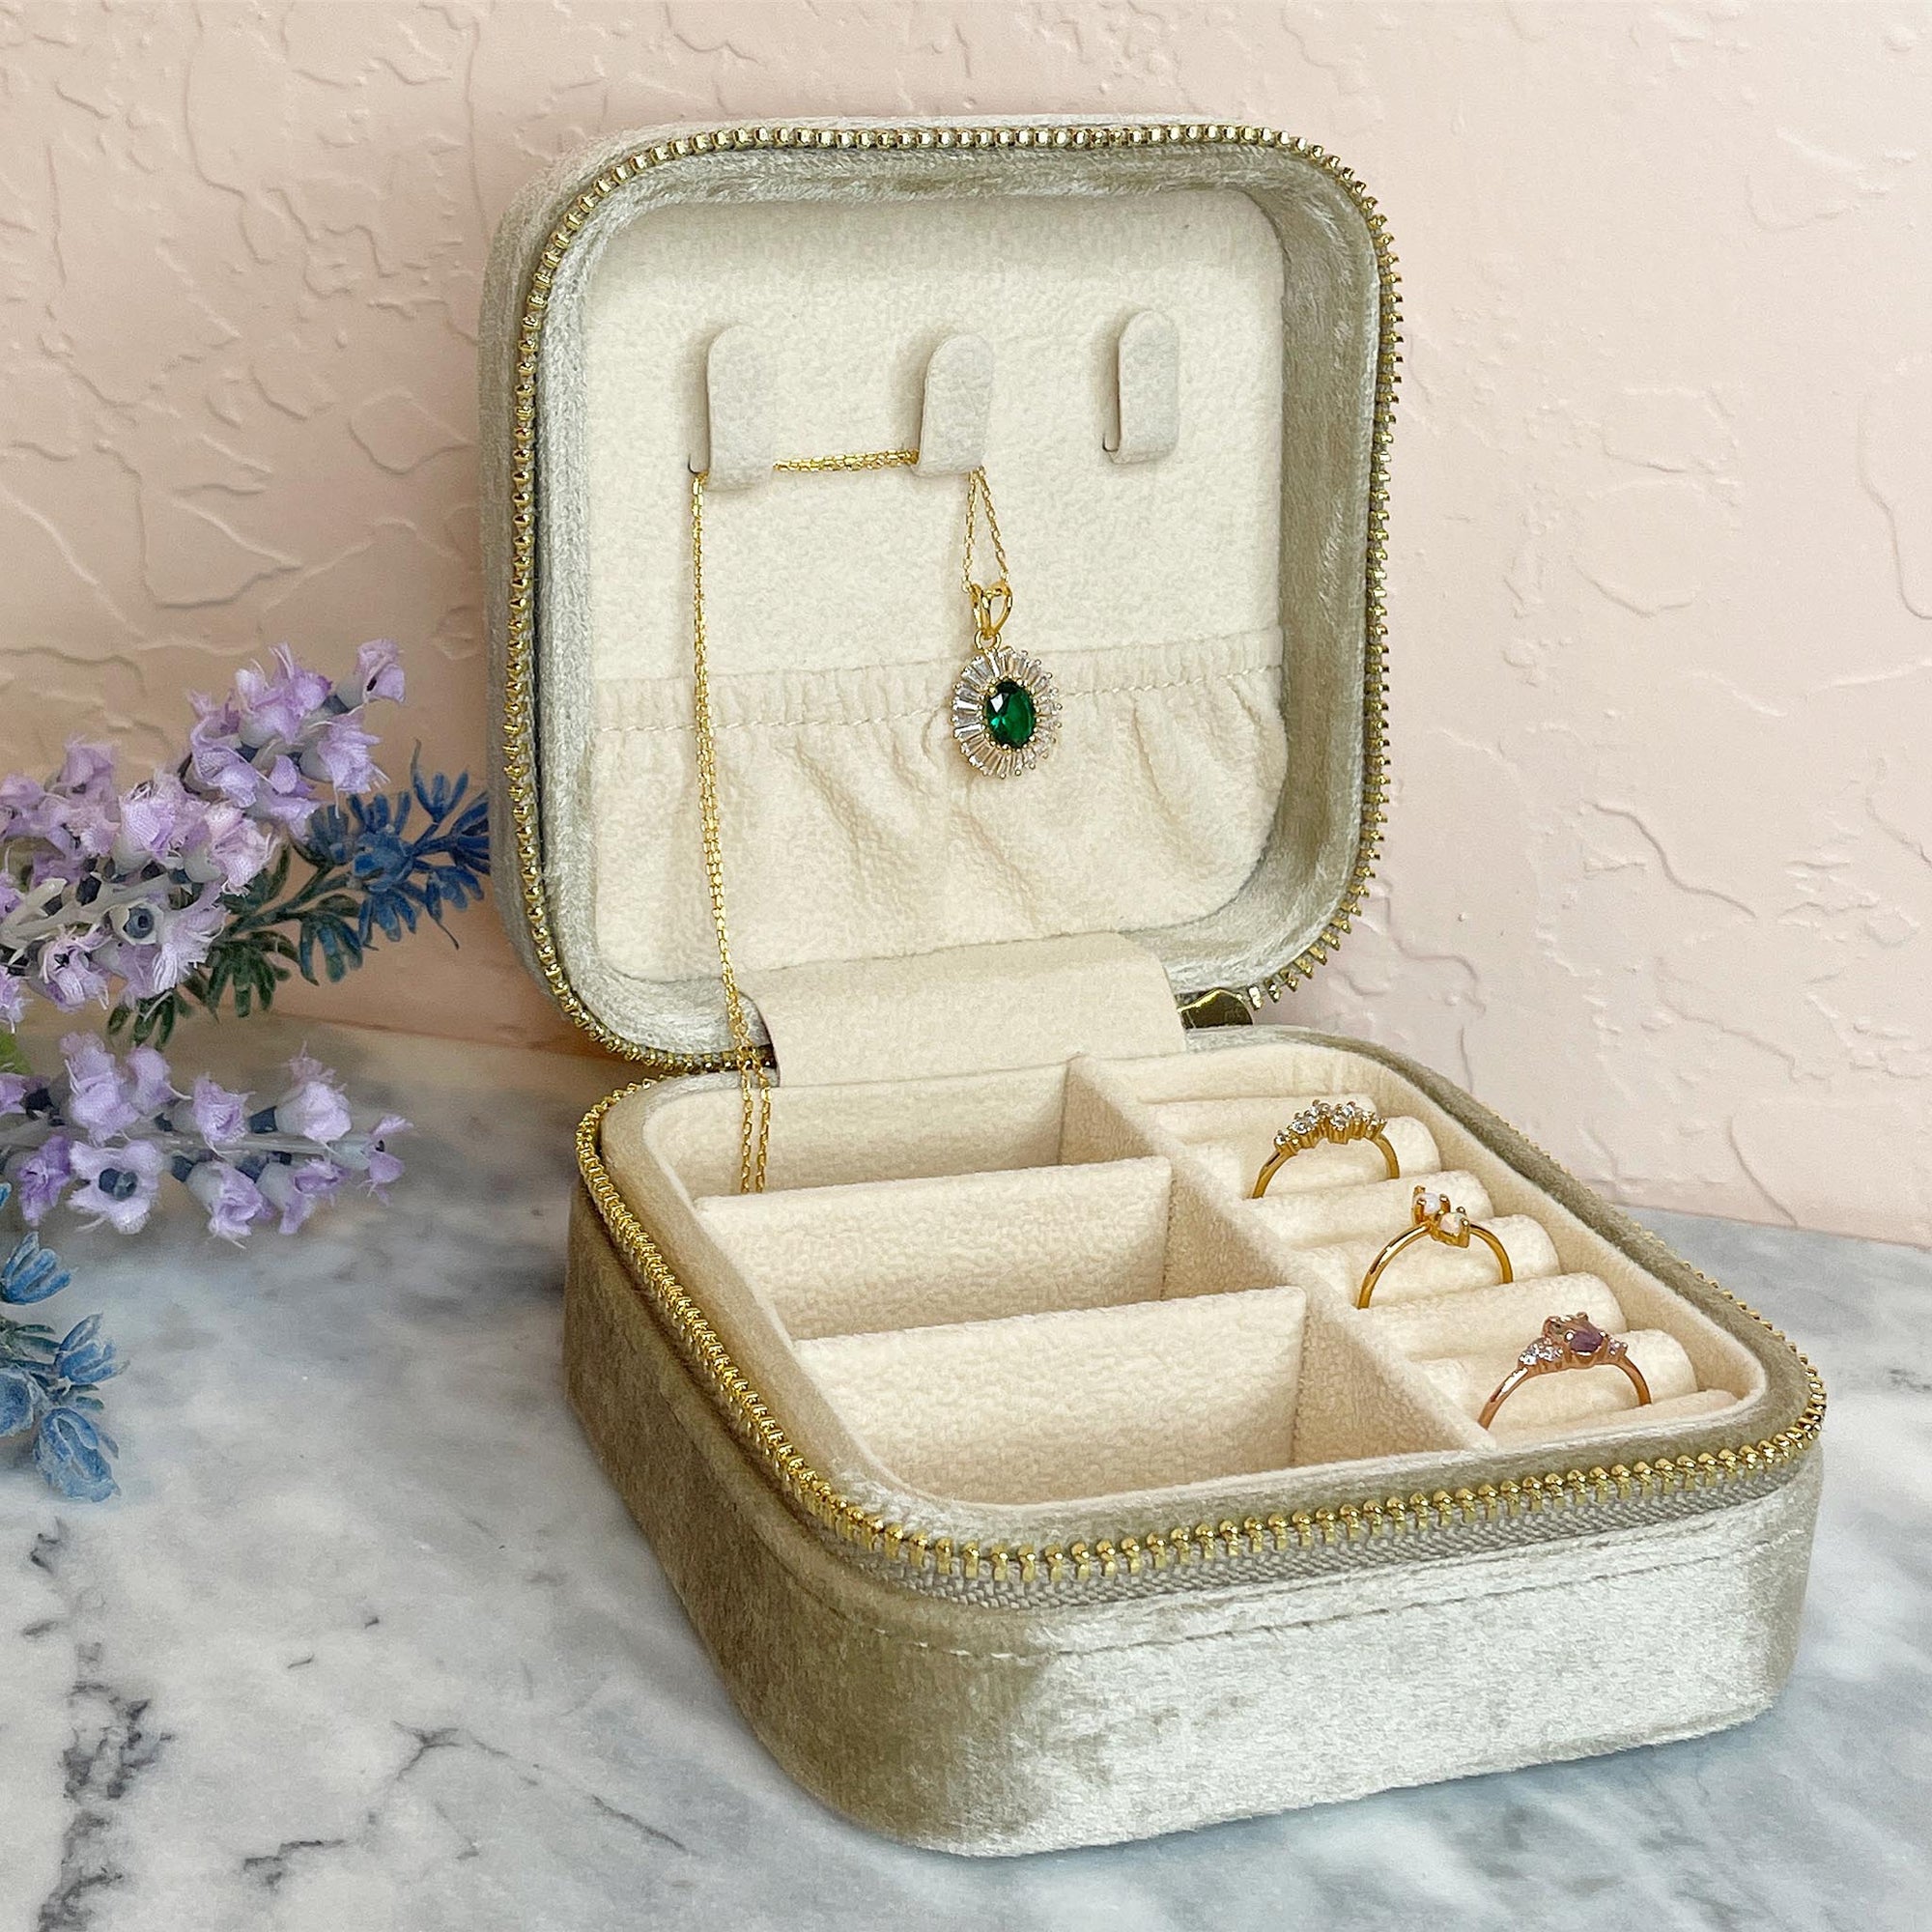 Lux Suede Travel Case for Jewelry | La Kaiser Champagne